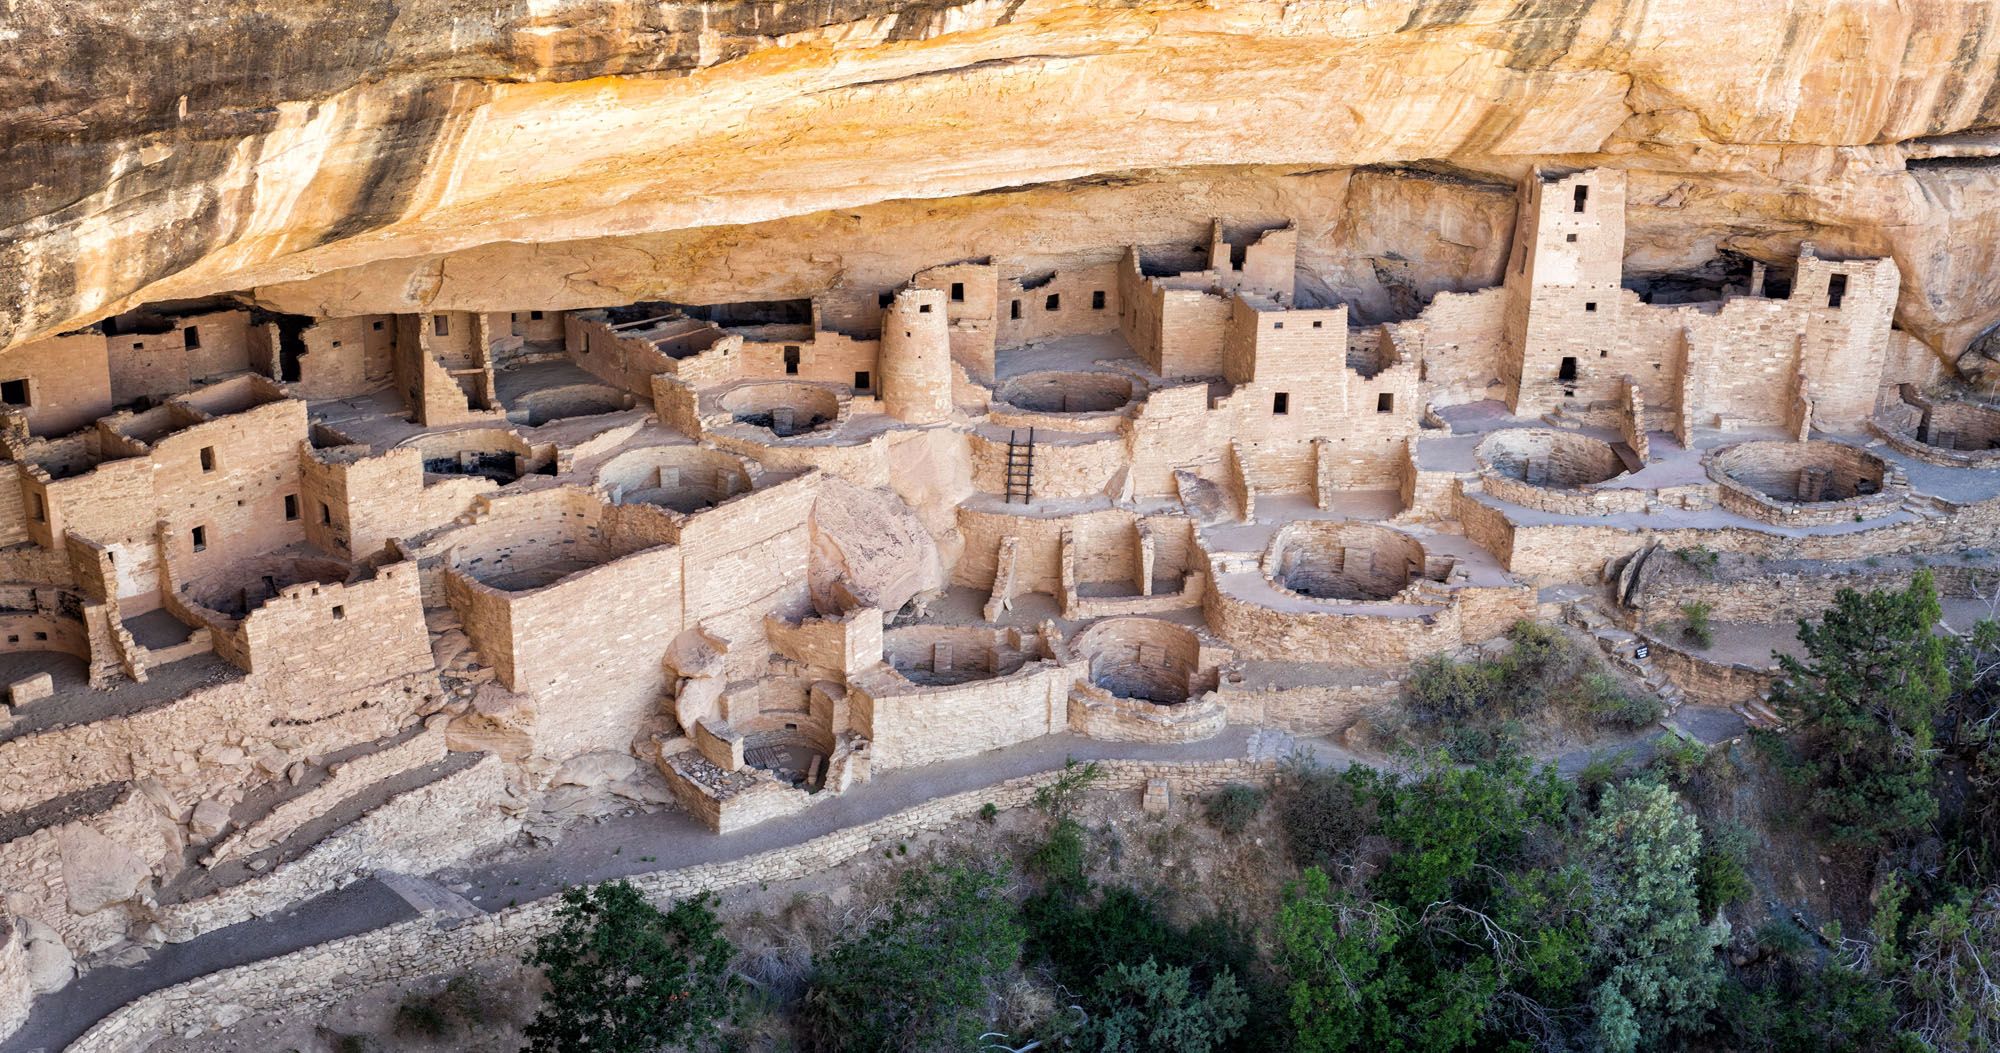 Featured image for “Top 10 Things to Do in Mesa Verde National Park”